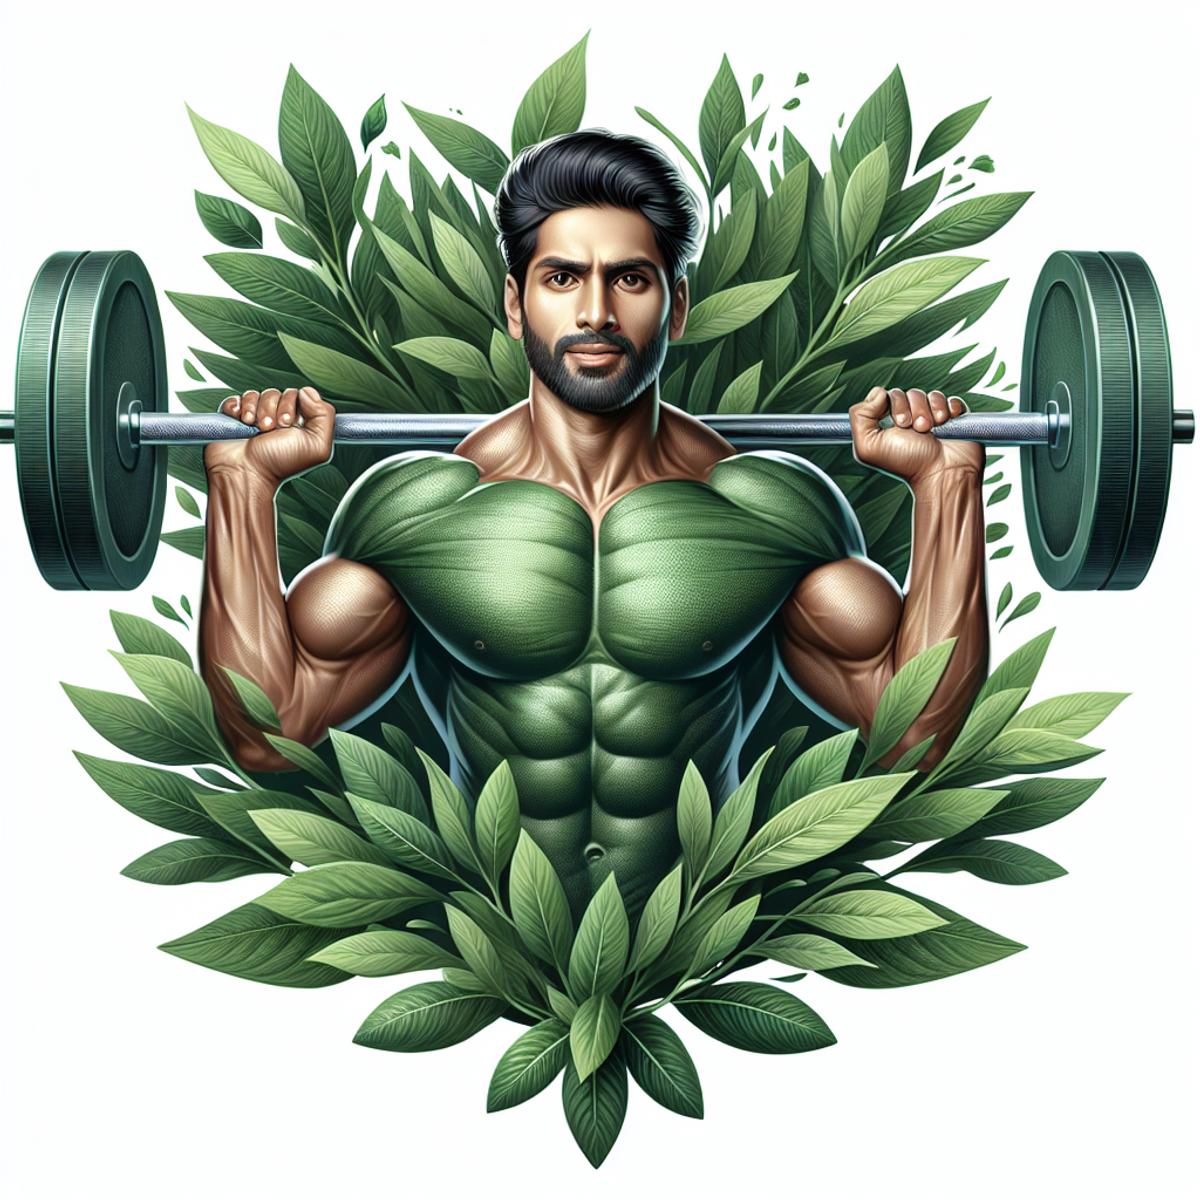 A smiling South Asian man in a gym, lifting weights confidently surrounded by green foliage.